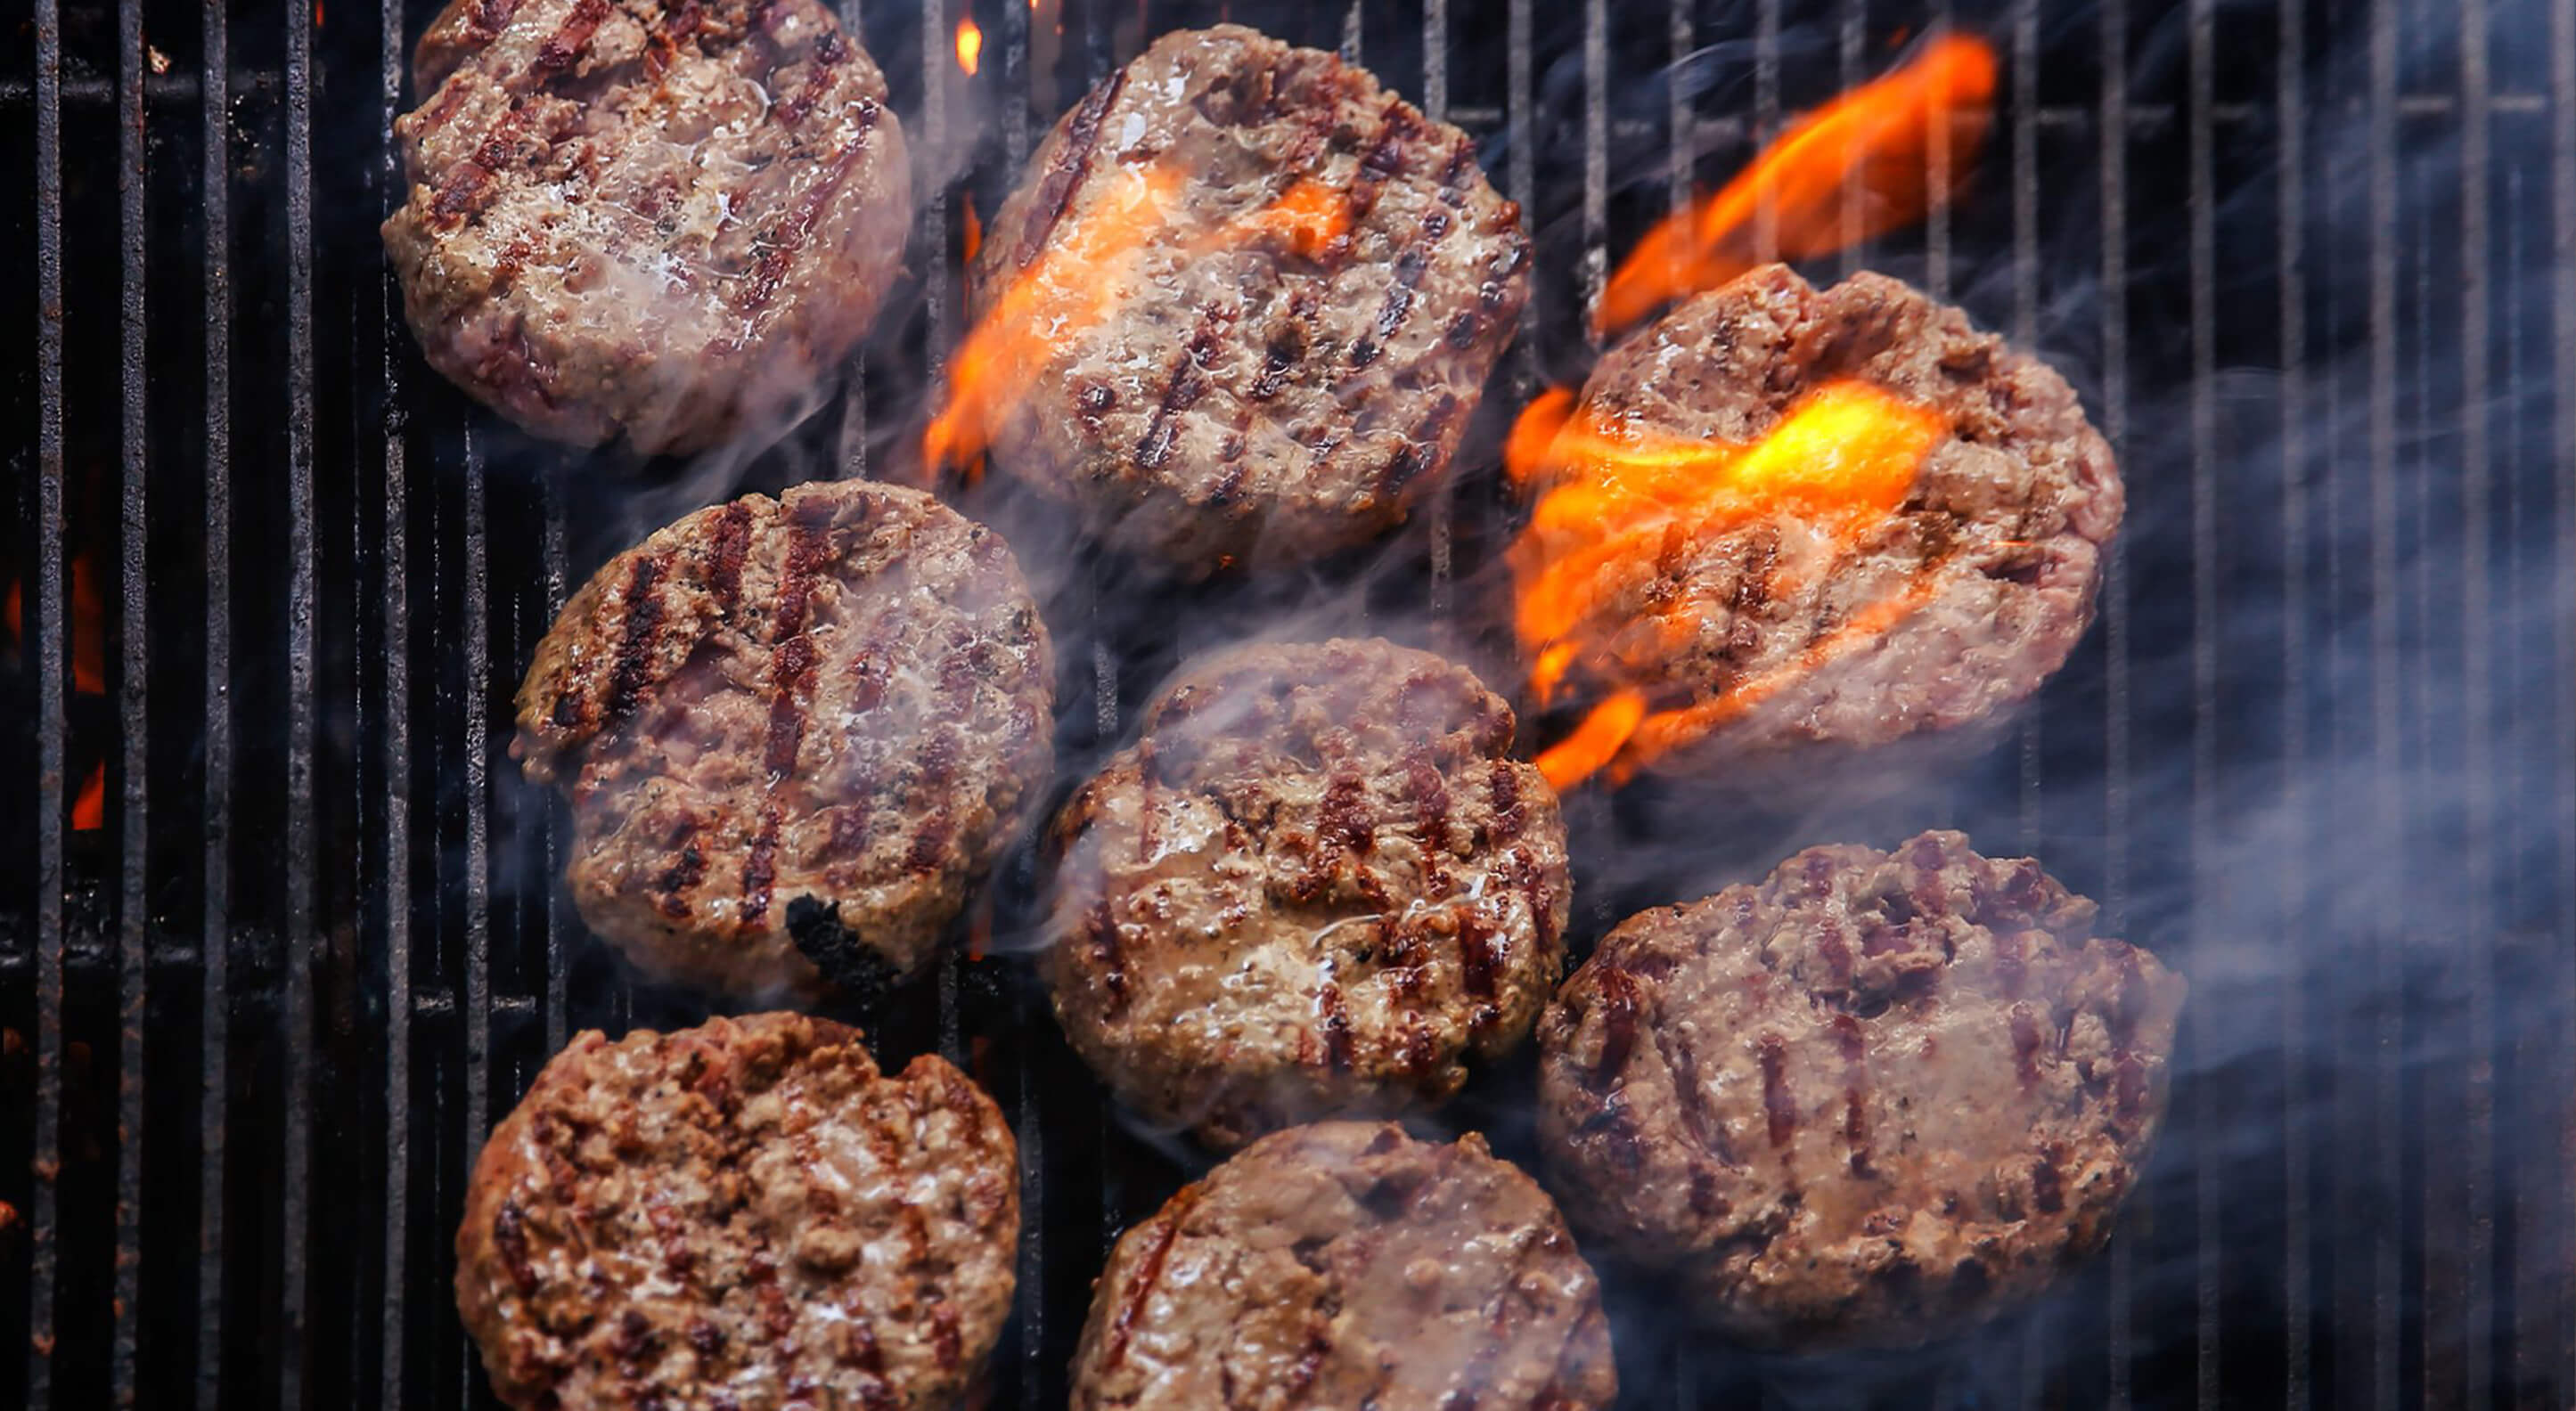 burger being cooked on a barbecue grill